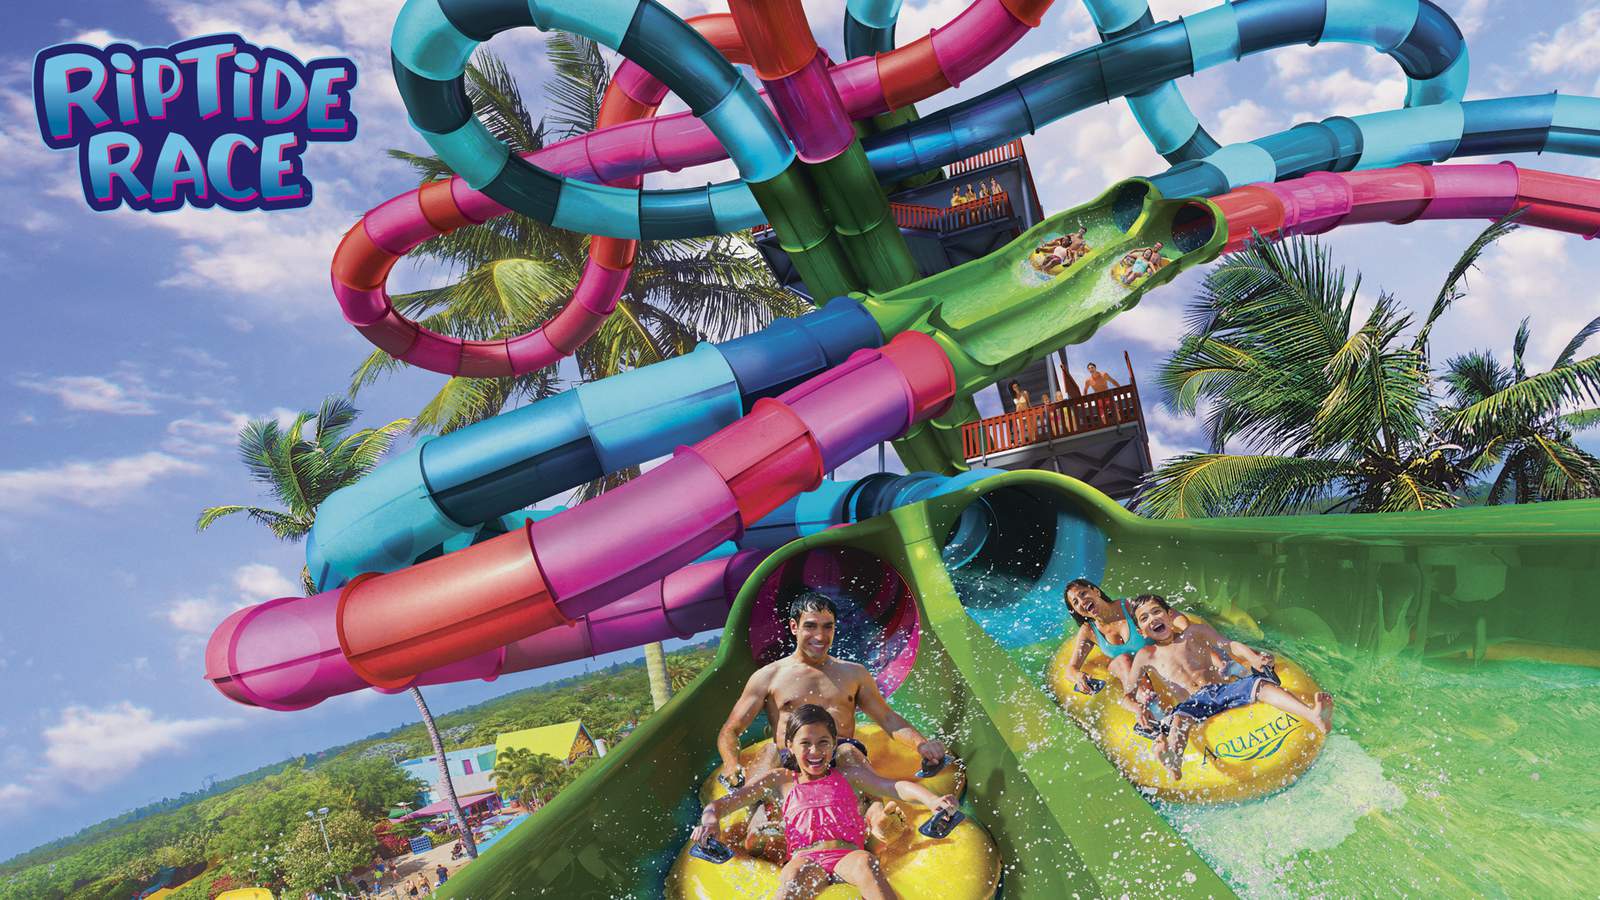 Aquatica inches closer to opening new ‘Riptide Race’ attraction